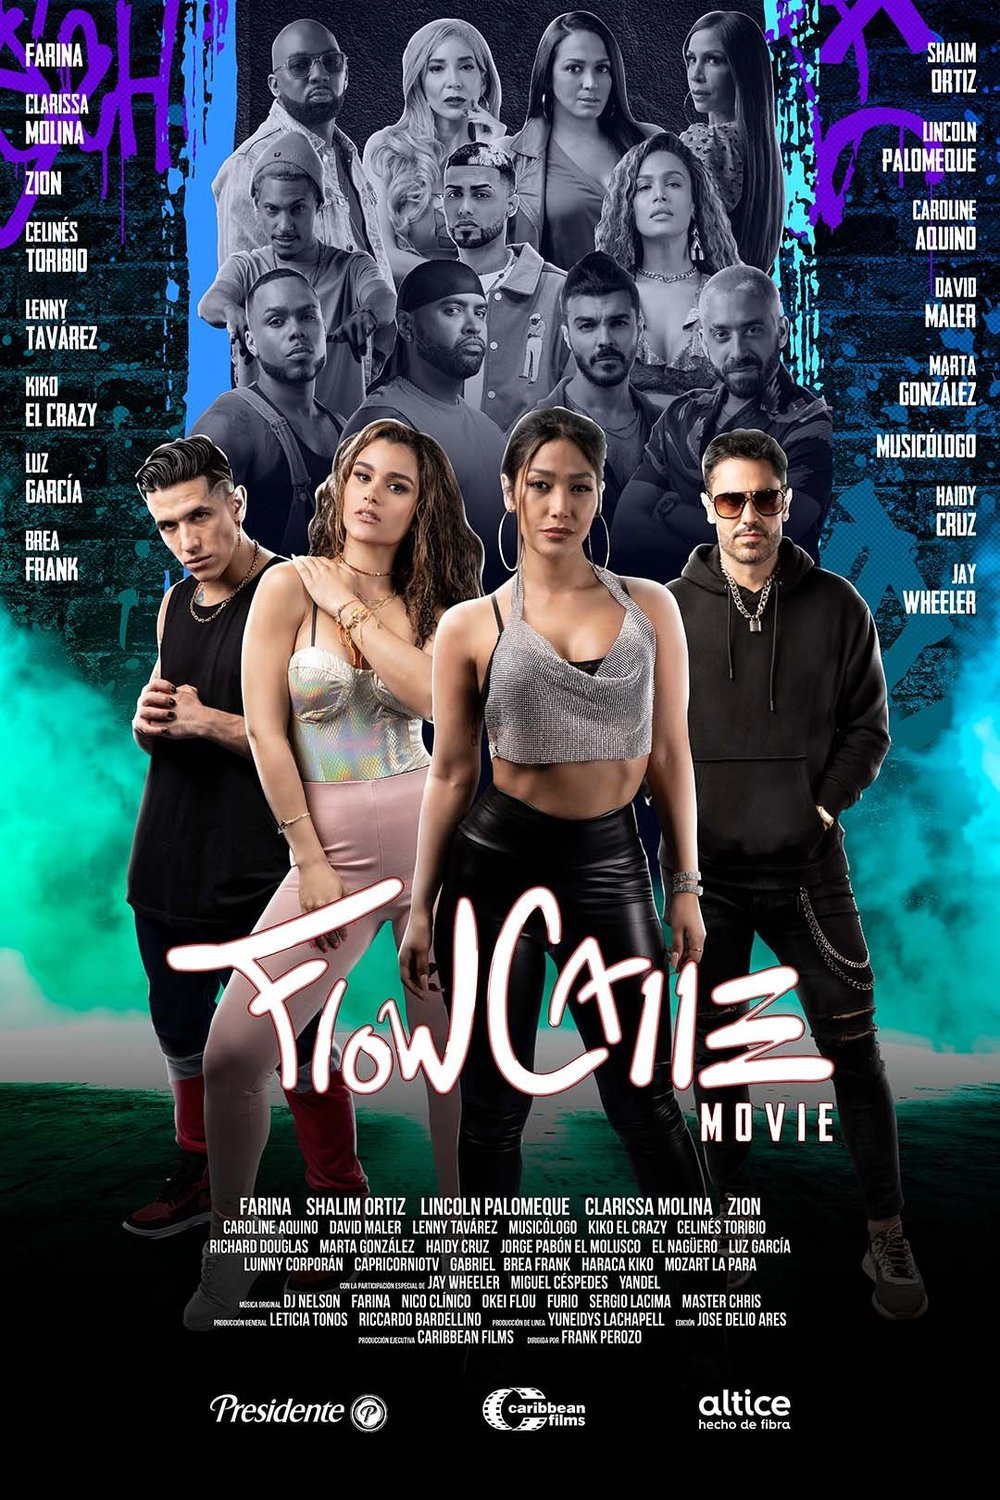 Spanish poster of the movie Flow Calle